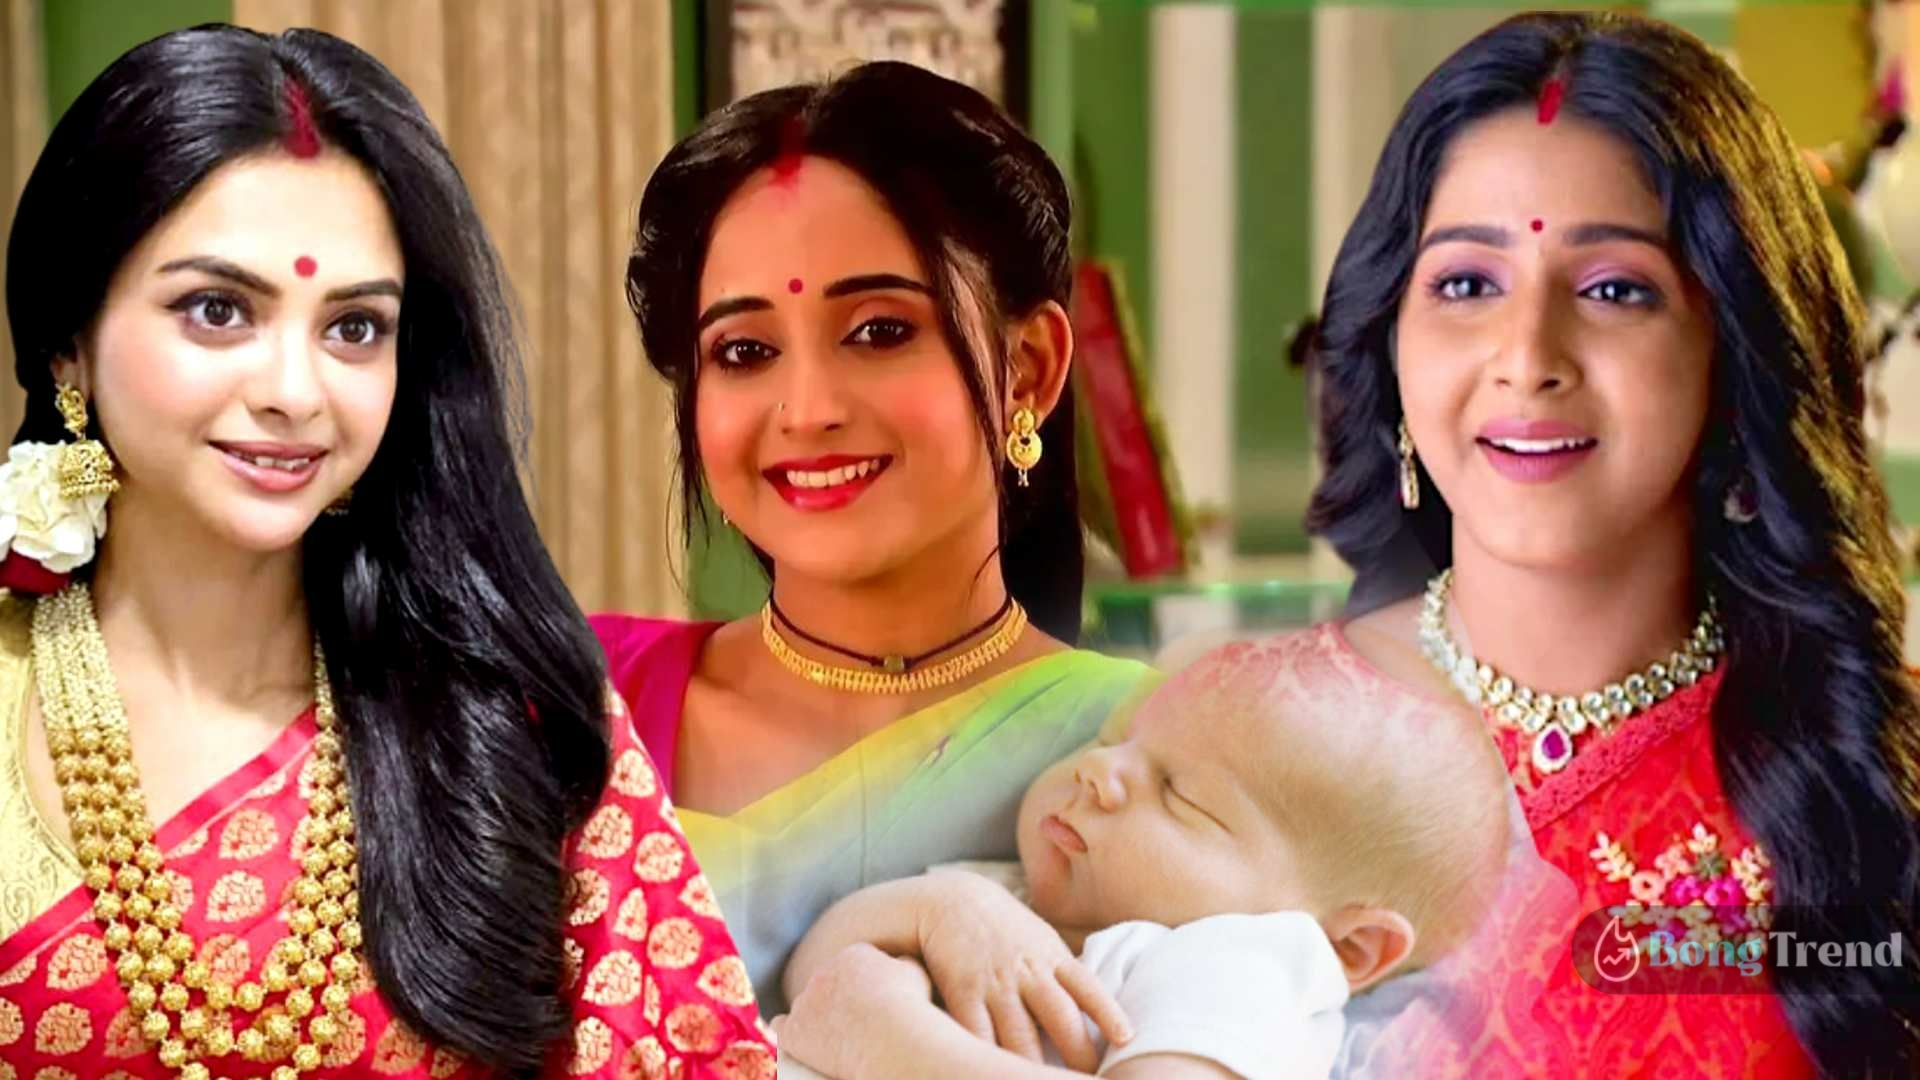 Tv actress who played mother's role in bengali serial